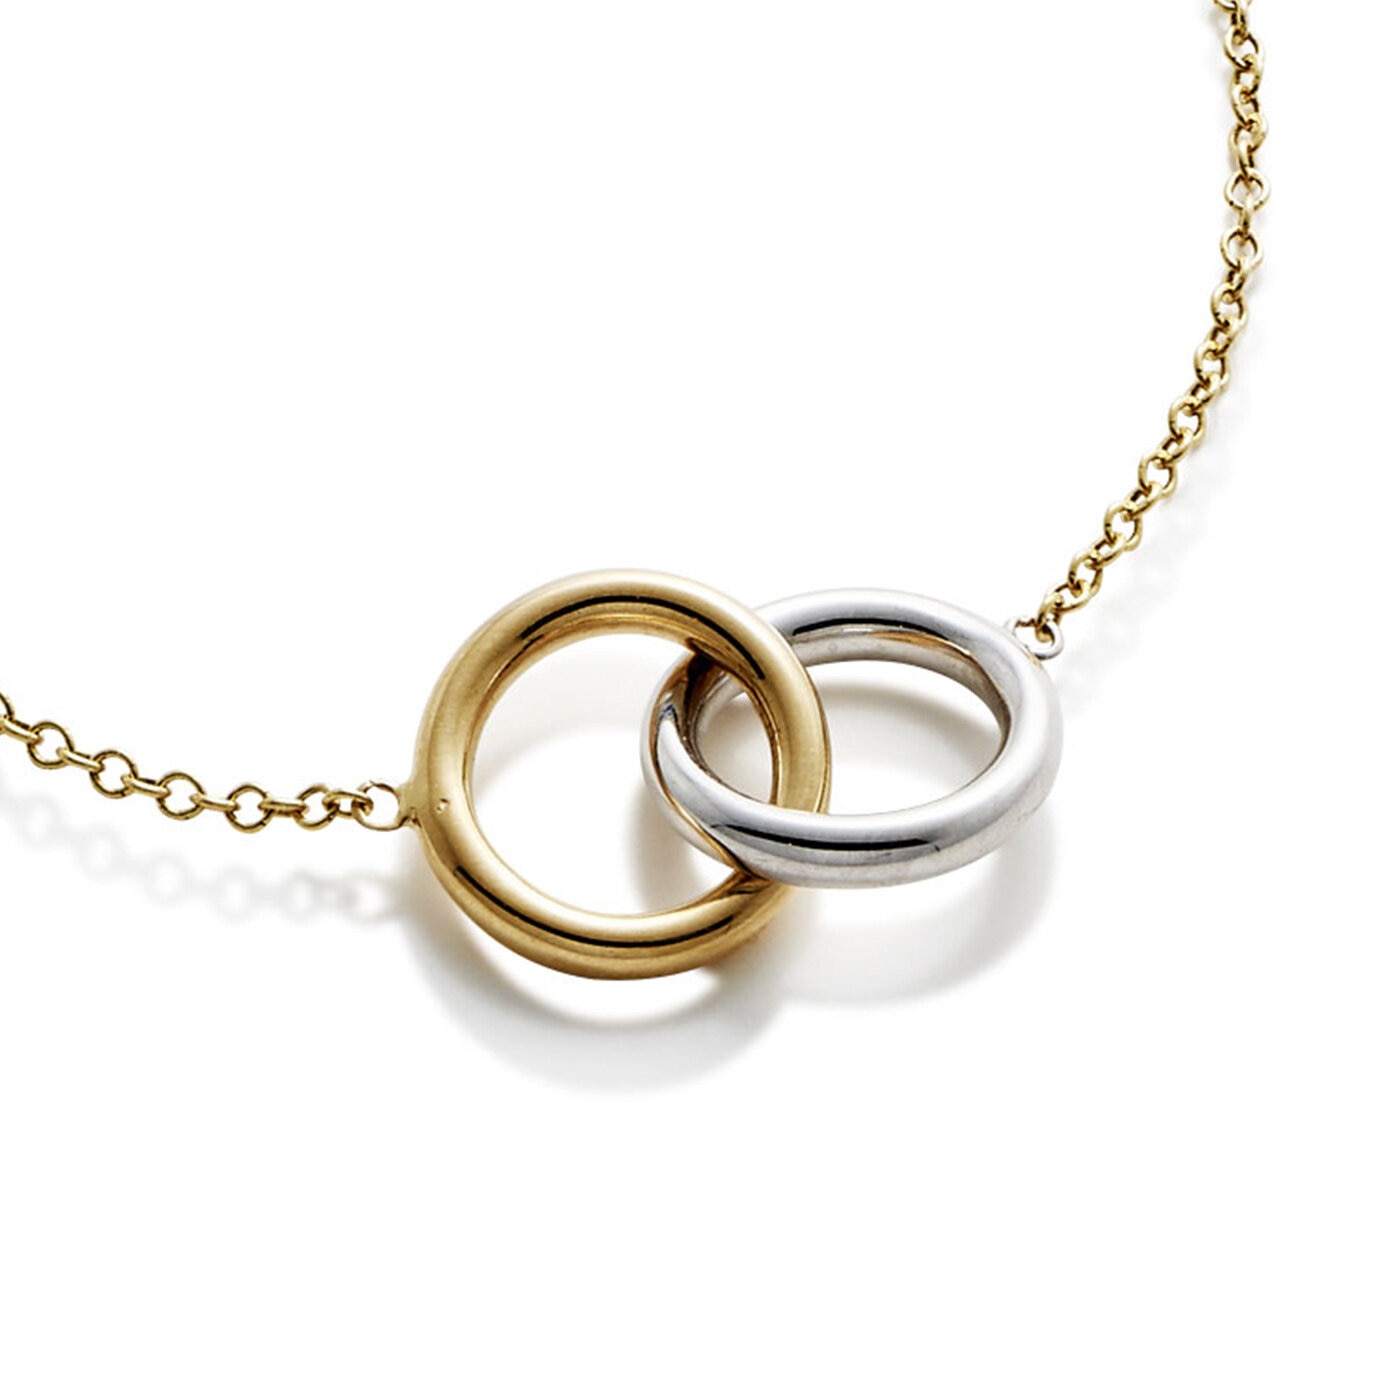 BIC gold circles necklace